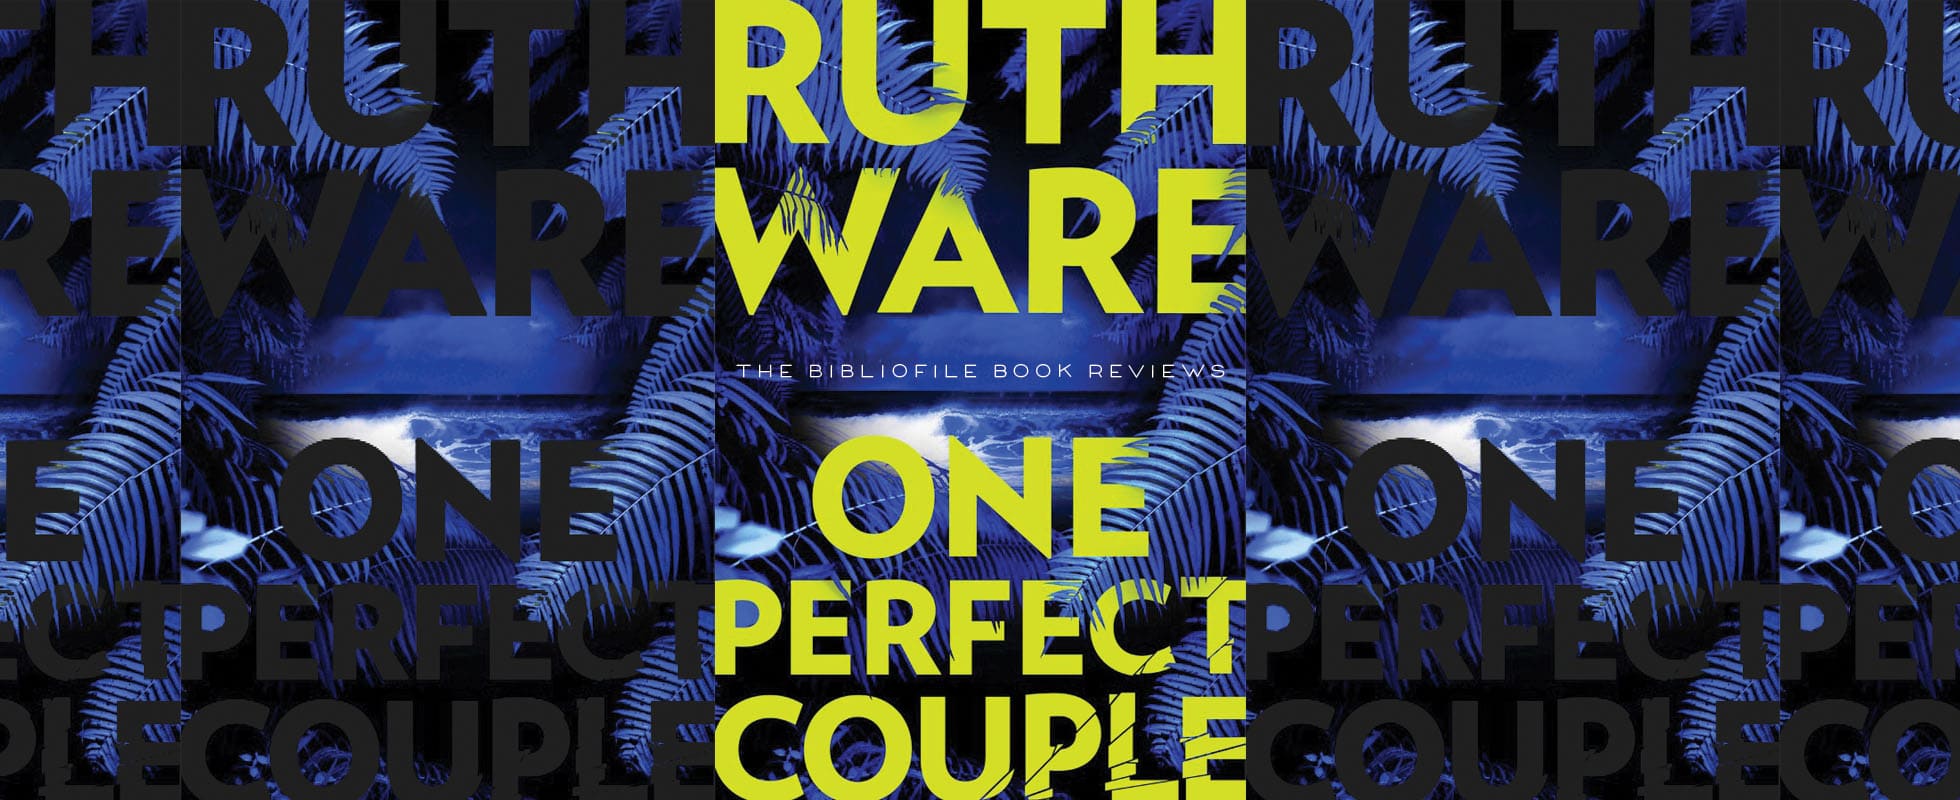 One Perfect Couple by Ruth Ware book review plot summary synopsis recap discussion spoilers